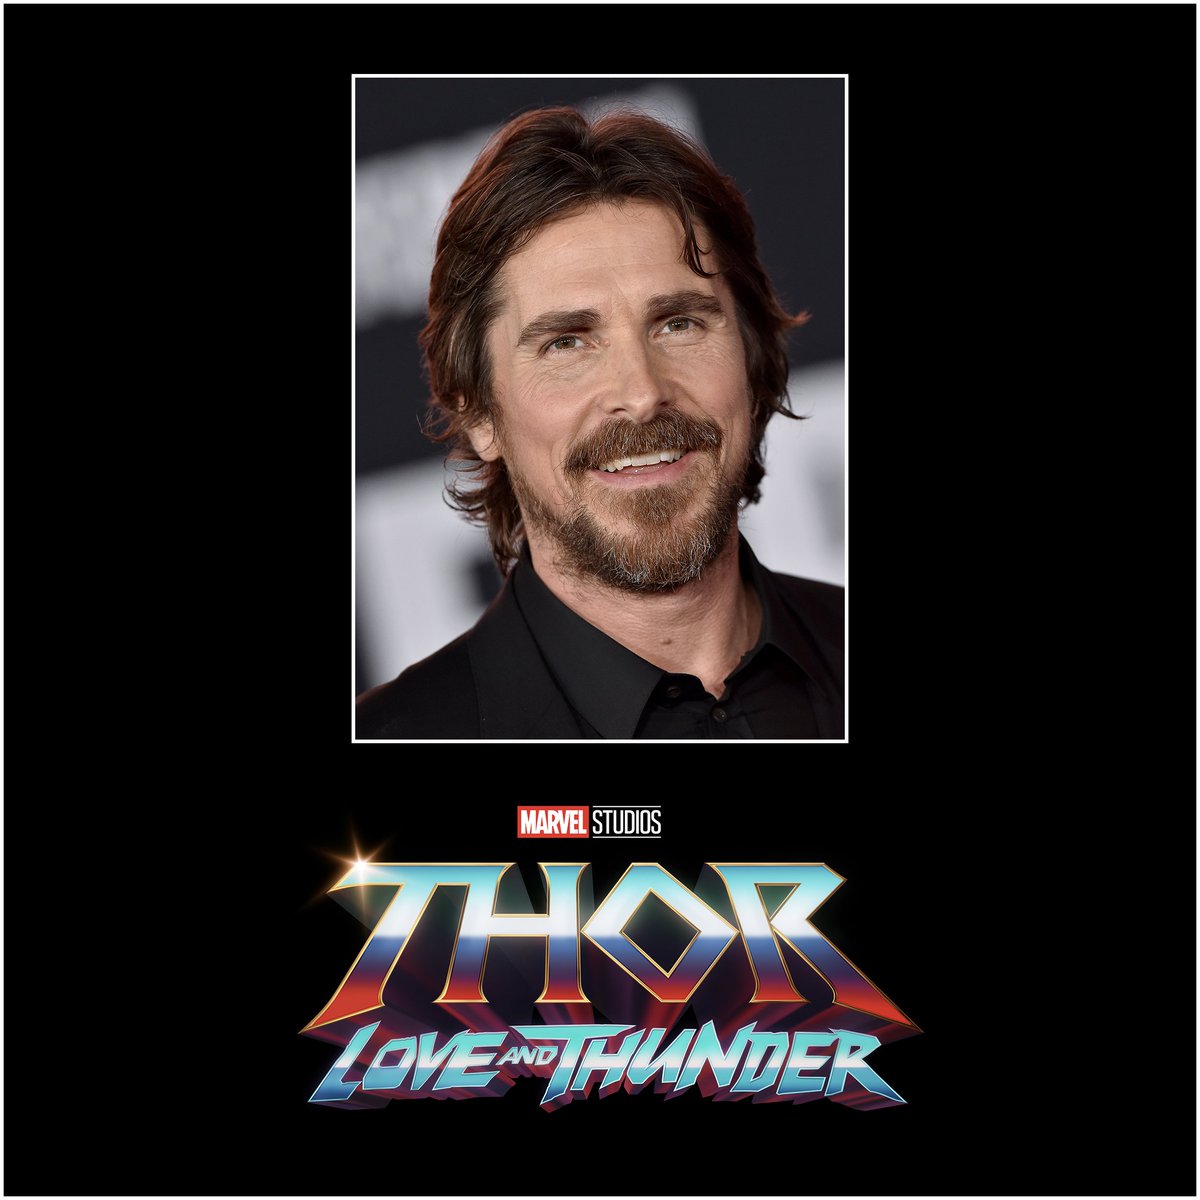 Academy Award-winning actor Christian Bale will join the cast of Thor: Love and Thunder as the villain Gorr the God Butcher. In theaters May 6, 2022. 